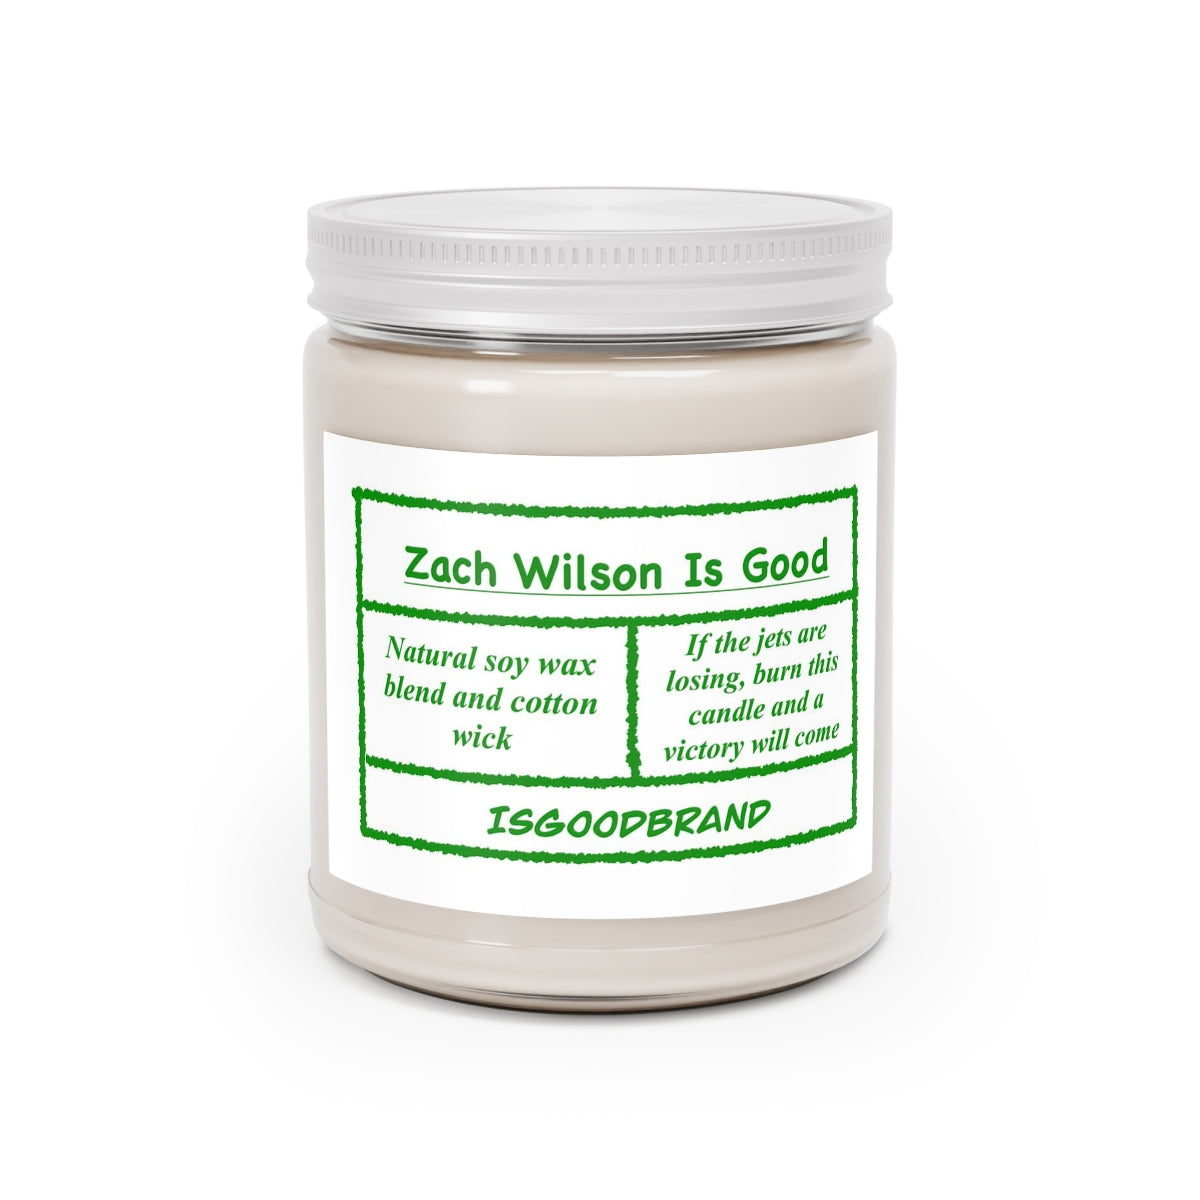 Zach Wilson Is Good Scented Candles, 9oz - IsGoodBrand